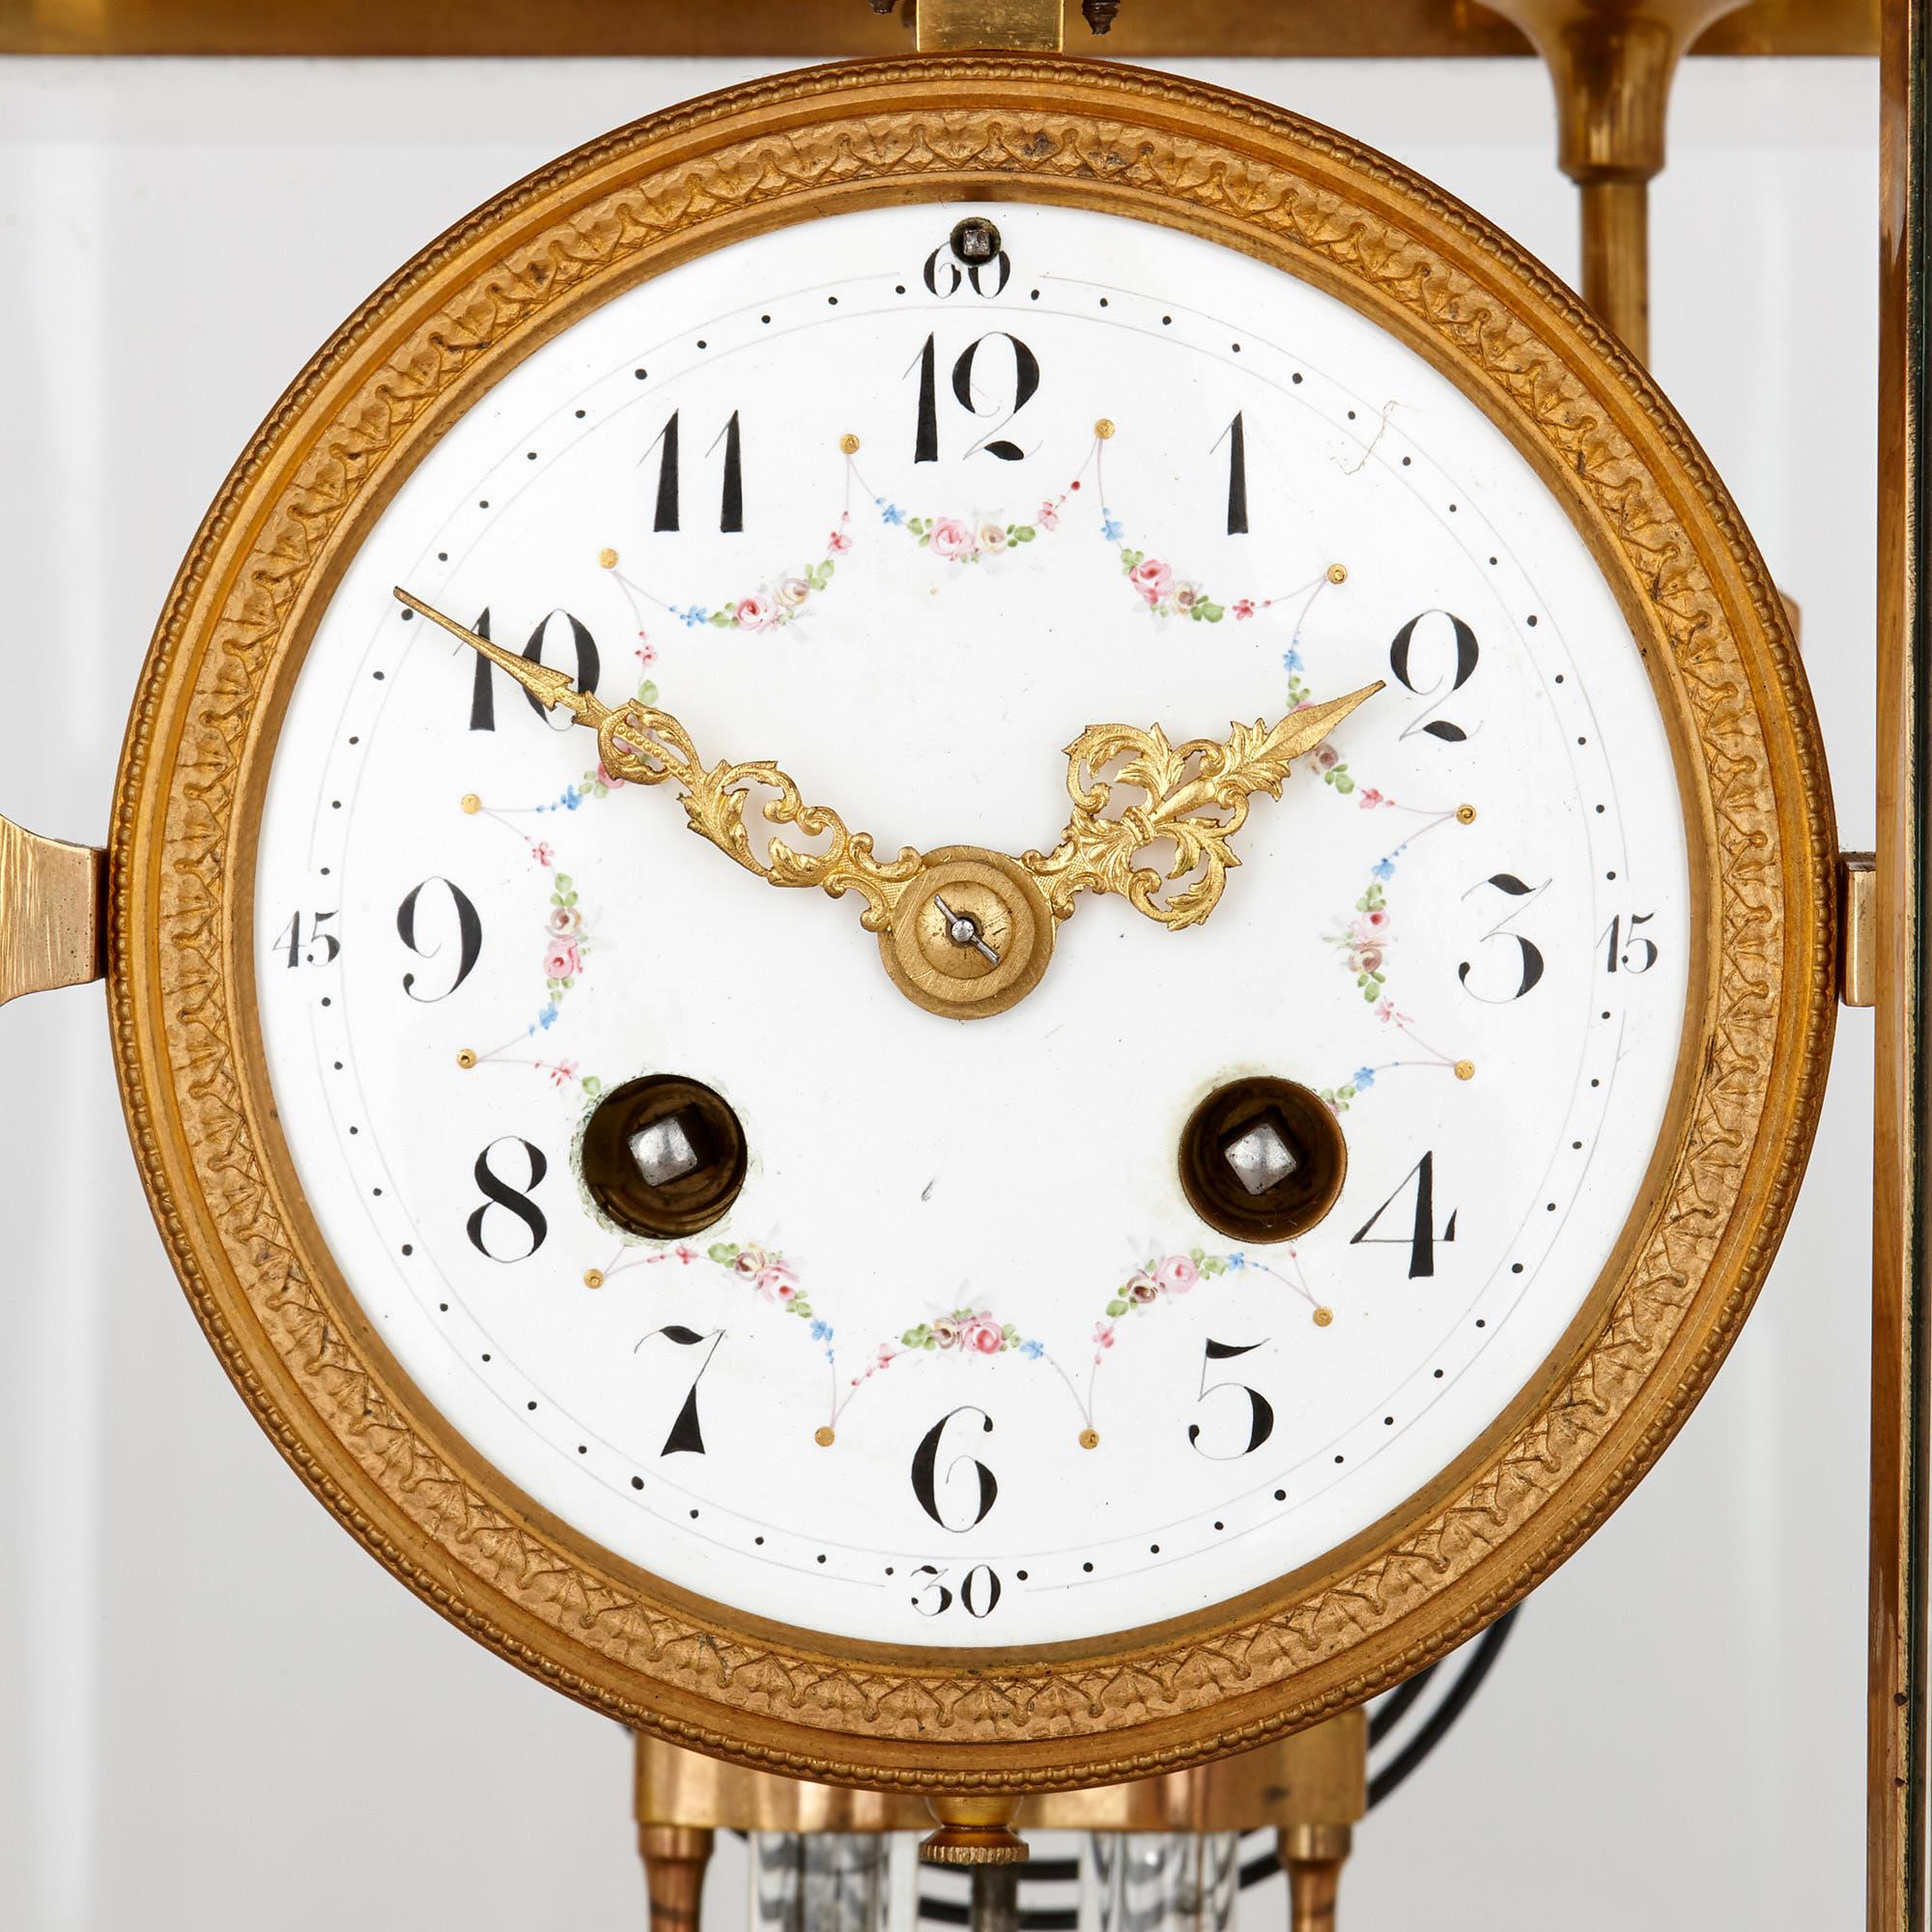 This beautiful three-piece clock set is designed in a French neoclassical style, popular in 19th century decorative arts. The set has been crafted from clear, cut glass and fine gilt bronze. 

The set consists of a central clock, accompanied by